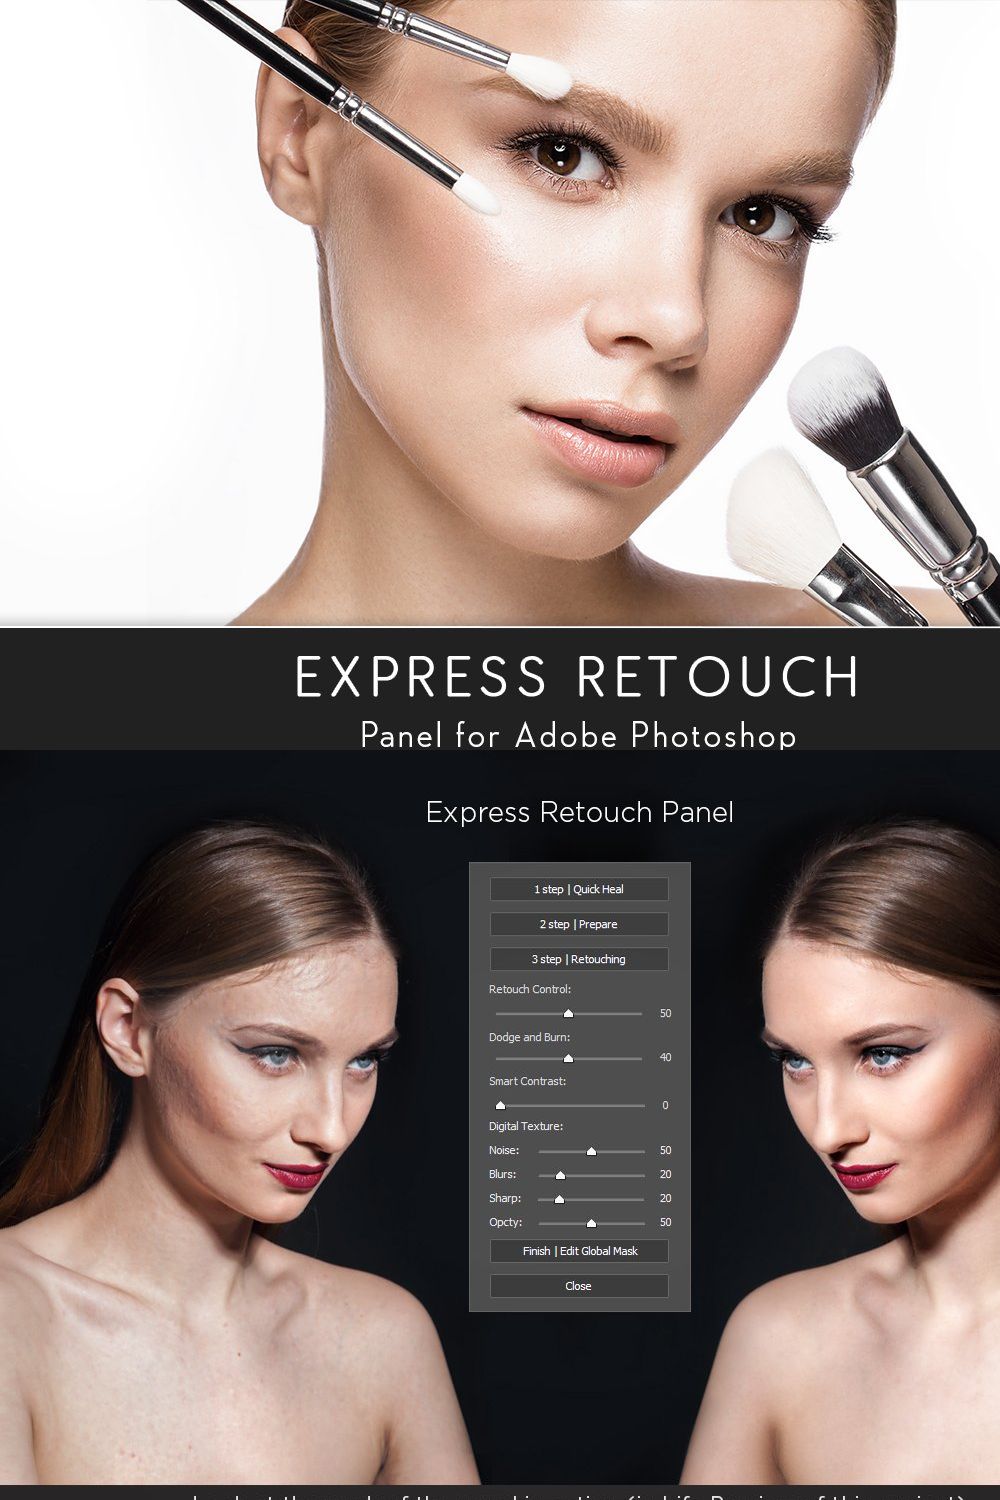 Express Retouch Panel pinterest preview image.